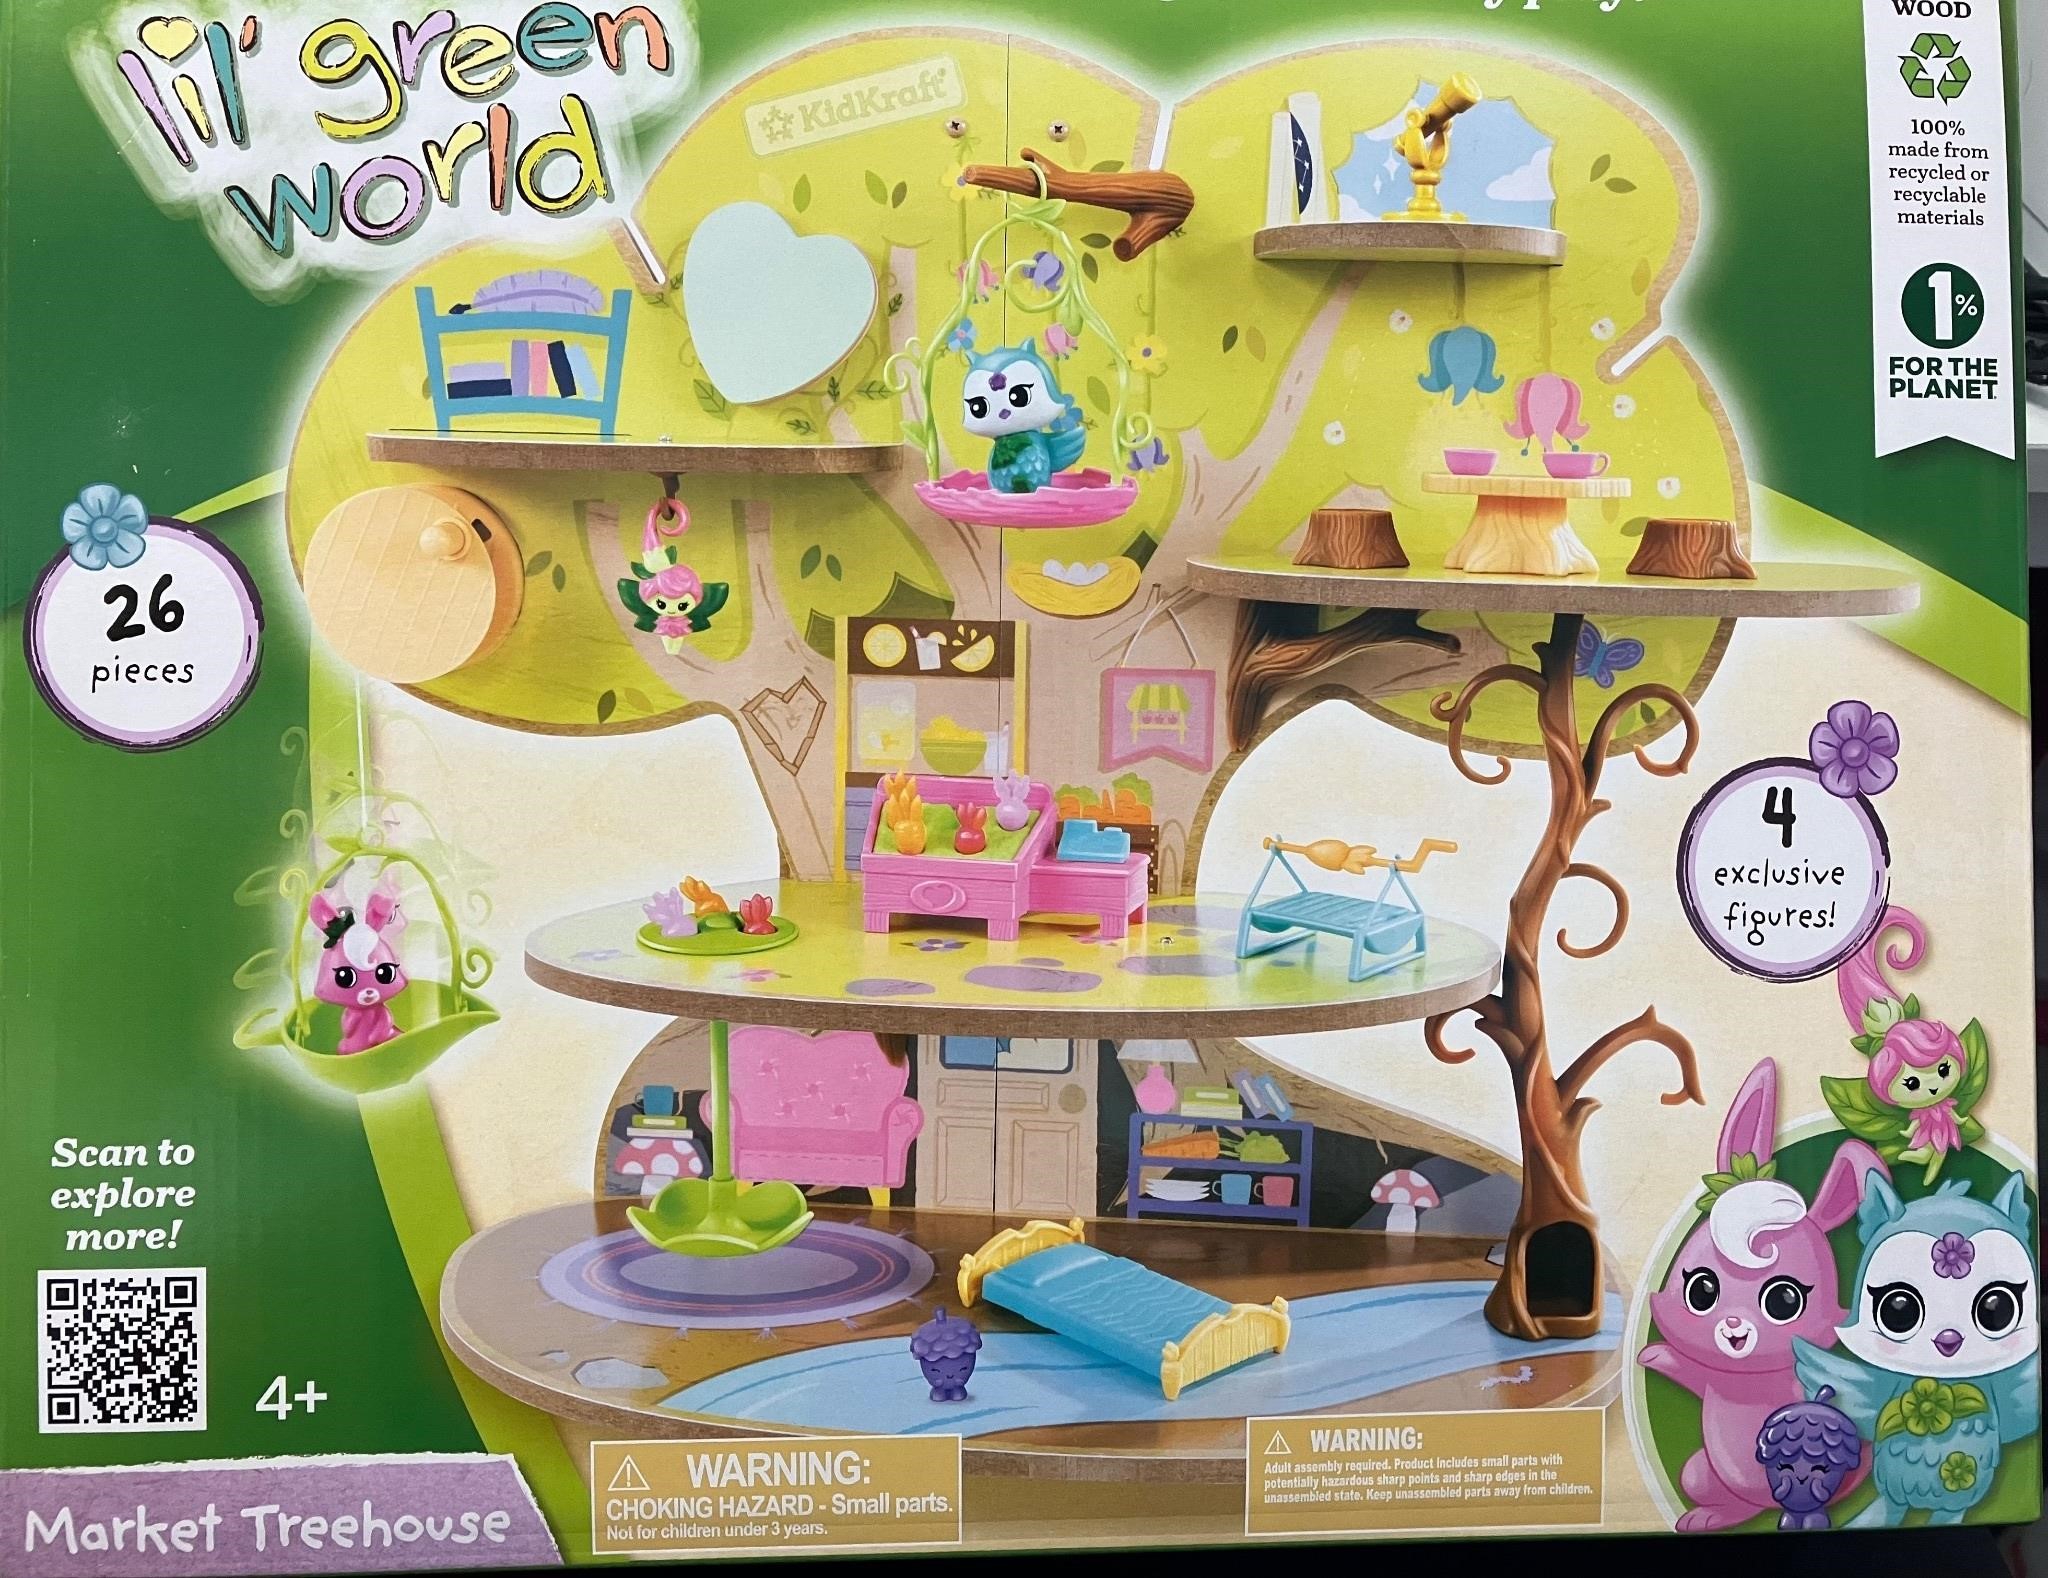 Lil green world wooden treehouse